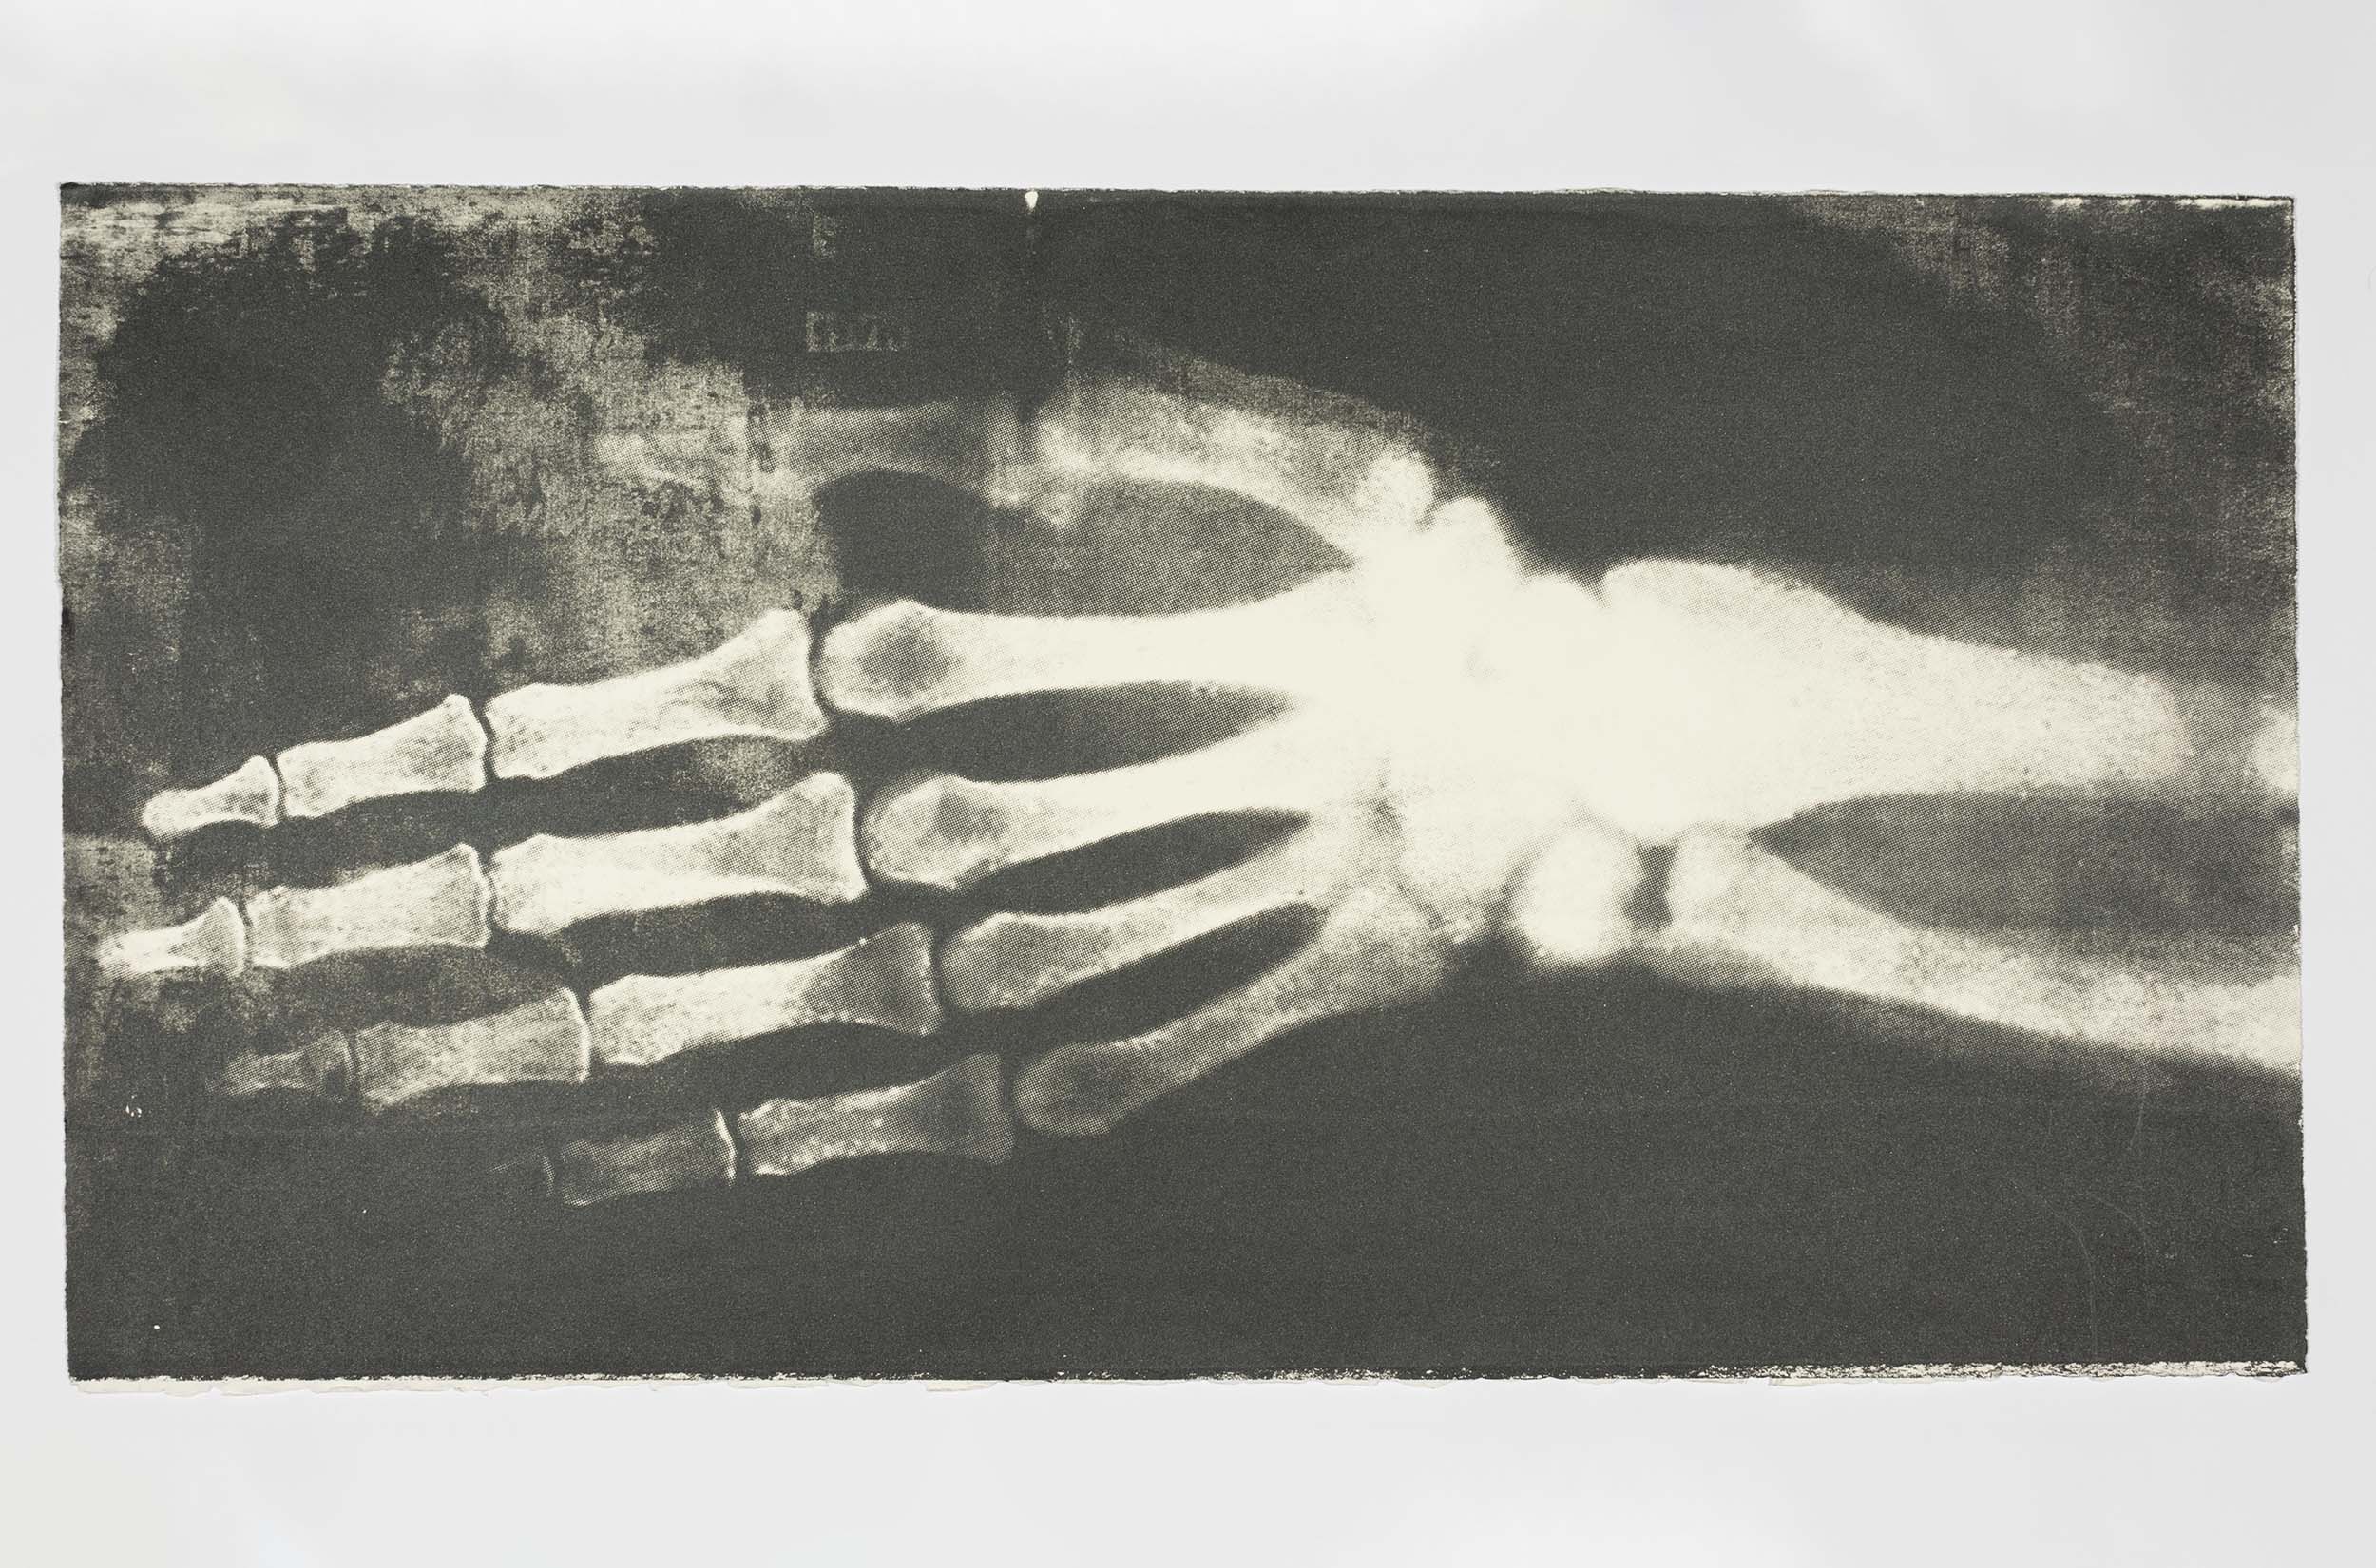 An artwork depicting an x-ray of a person's hand, wrist, and arm bones.